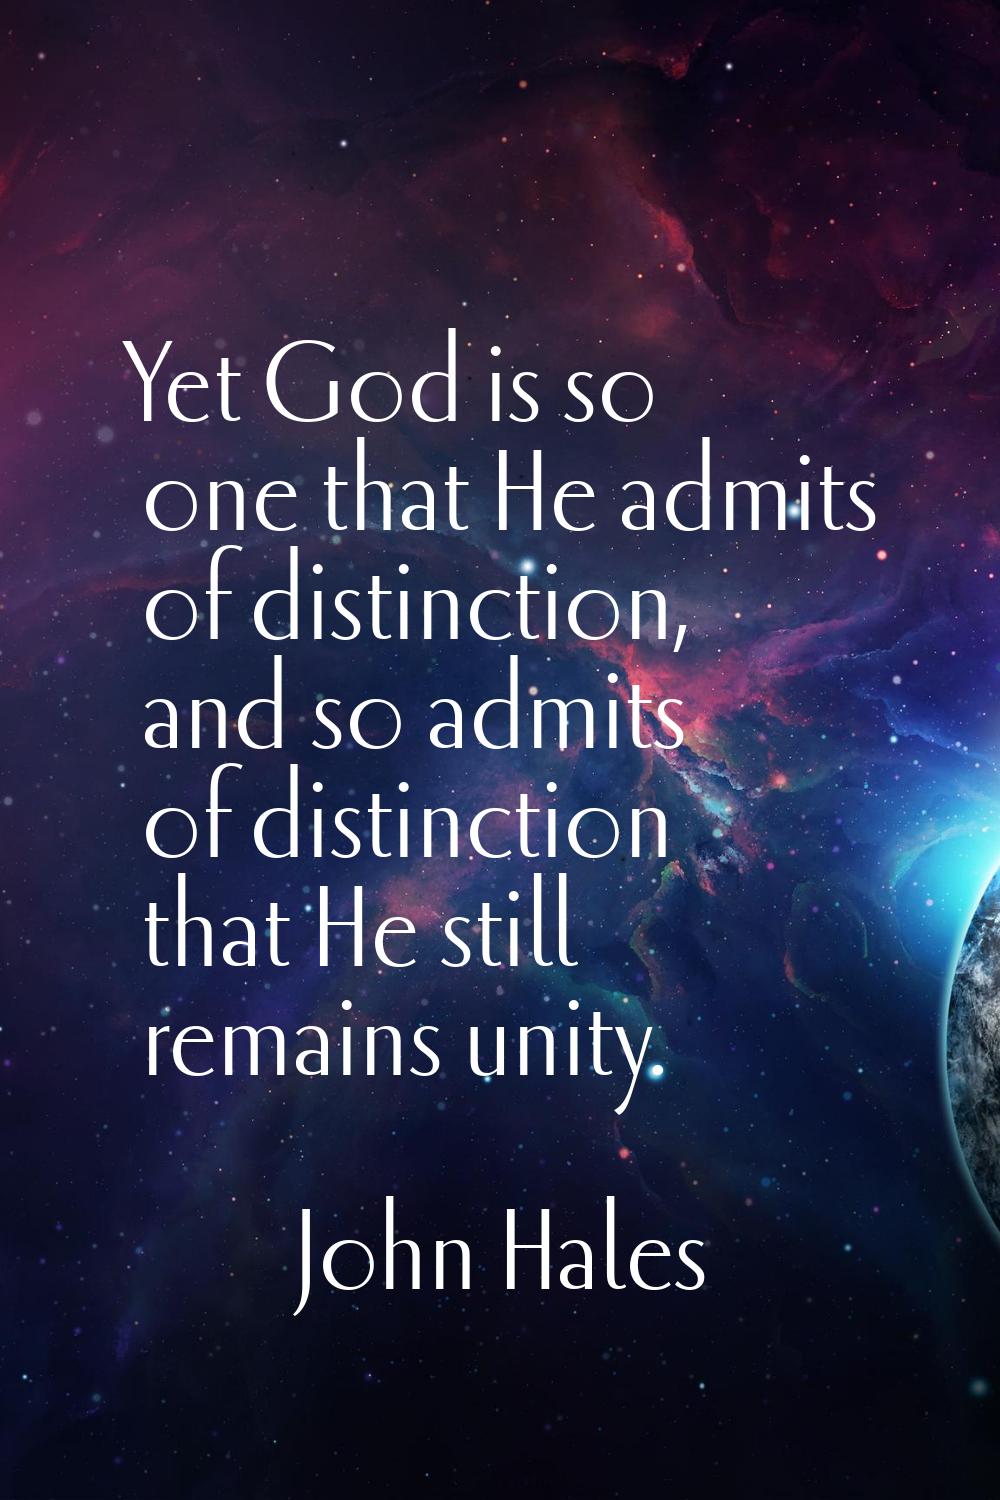 Yet God is so one that He admits of distinction, and so admits of distinction that He still remains